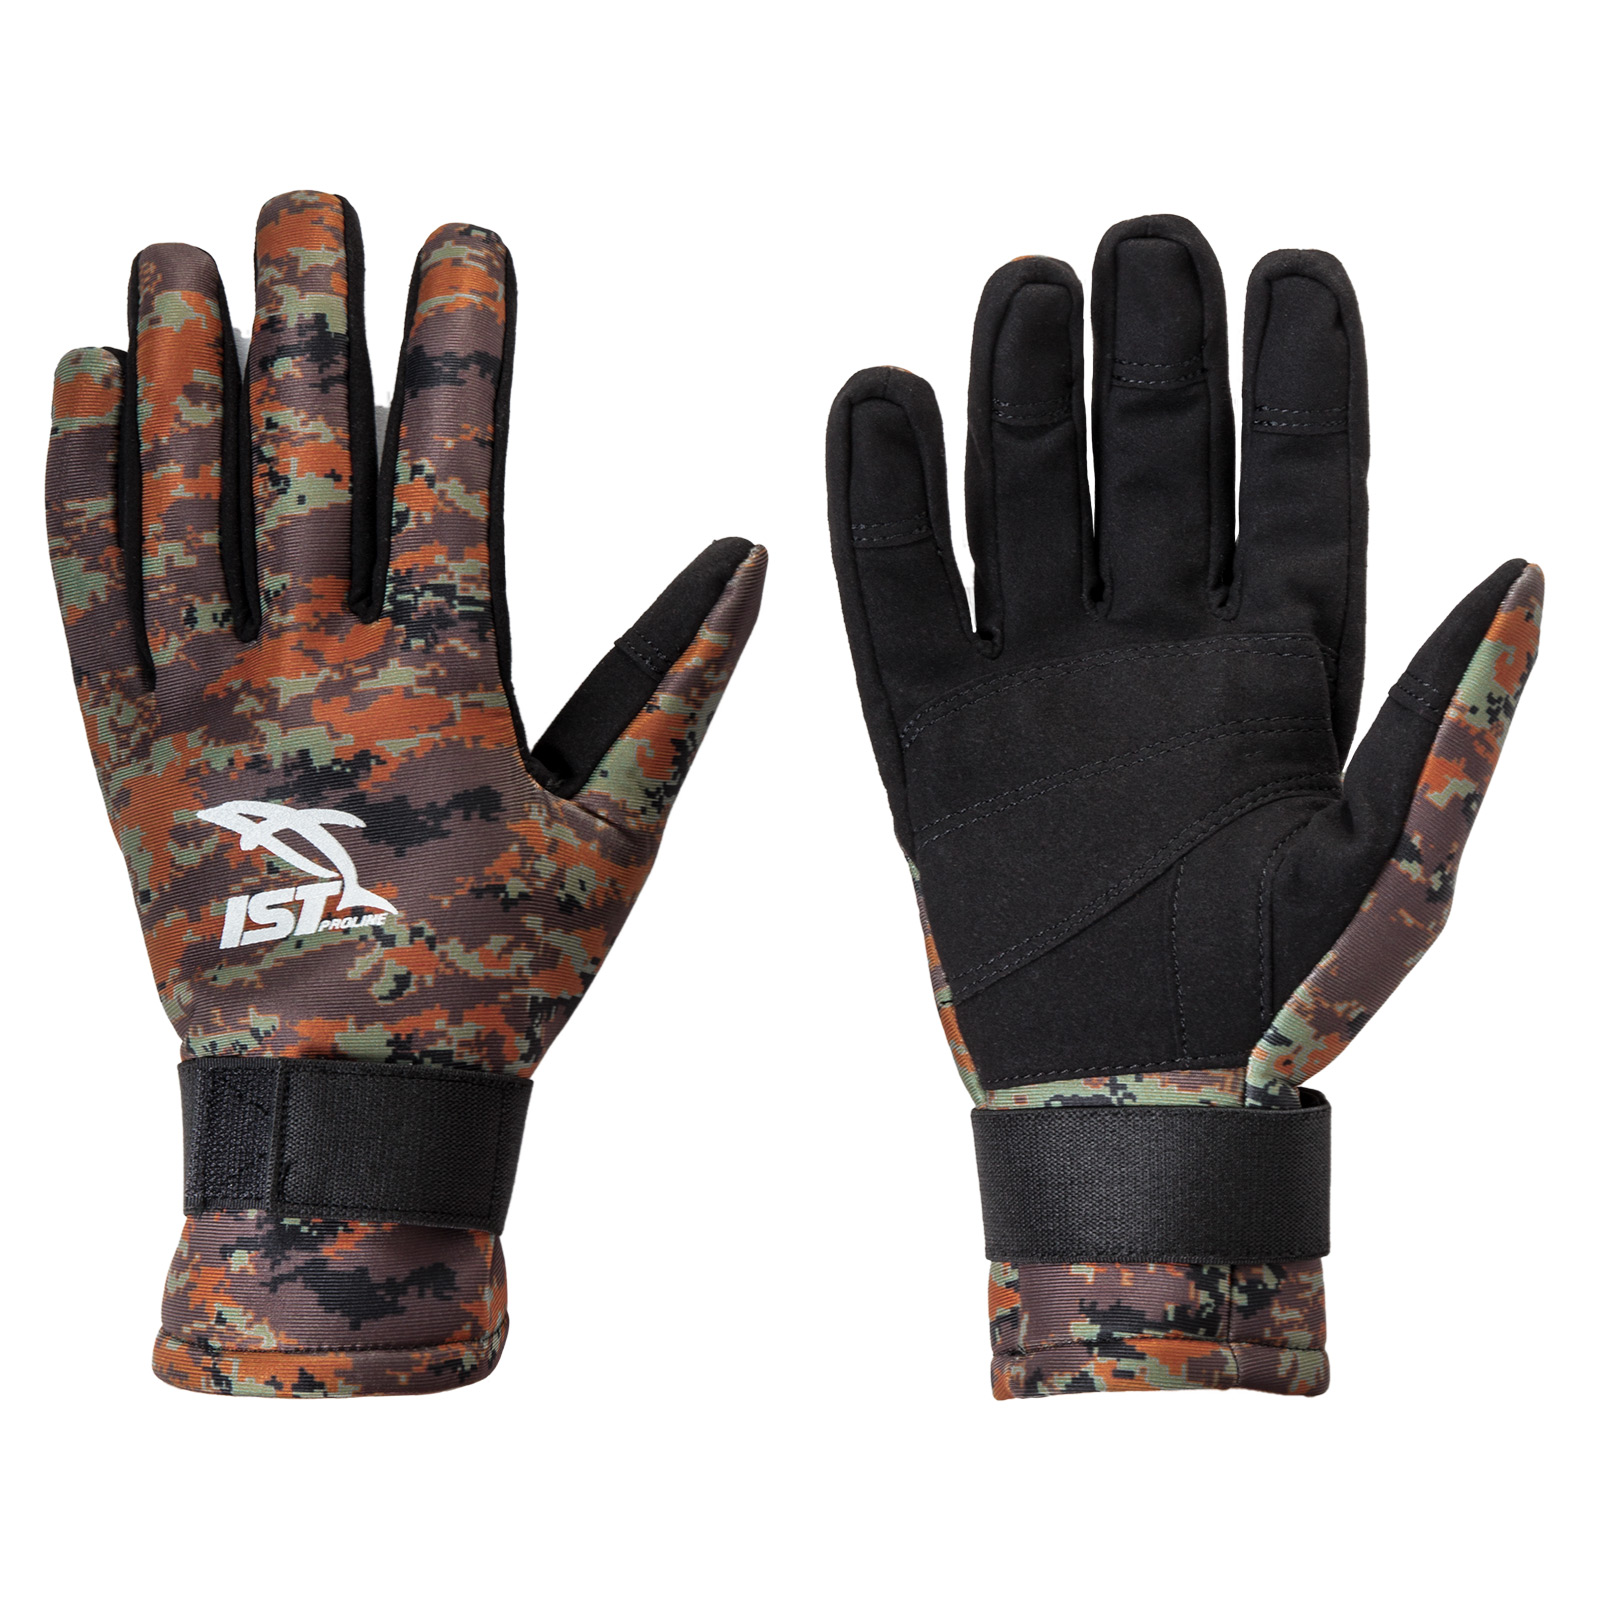 Freediving Spearfishing Neoprene Amara Gloves with Leather Palm WIL-AG-01 Sale 